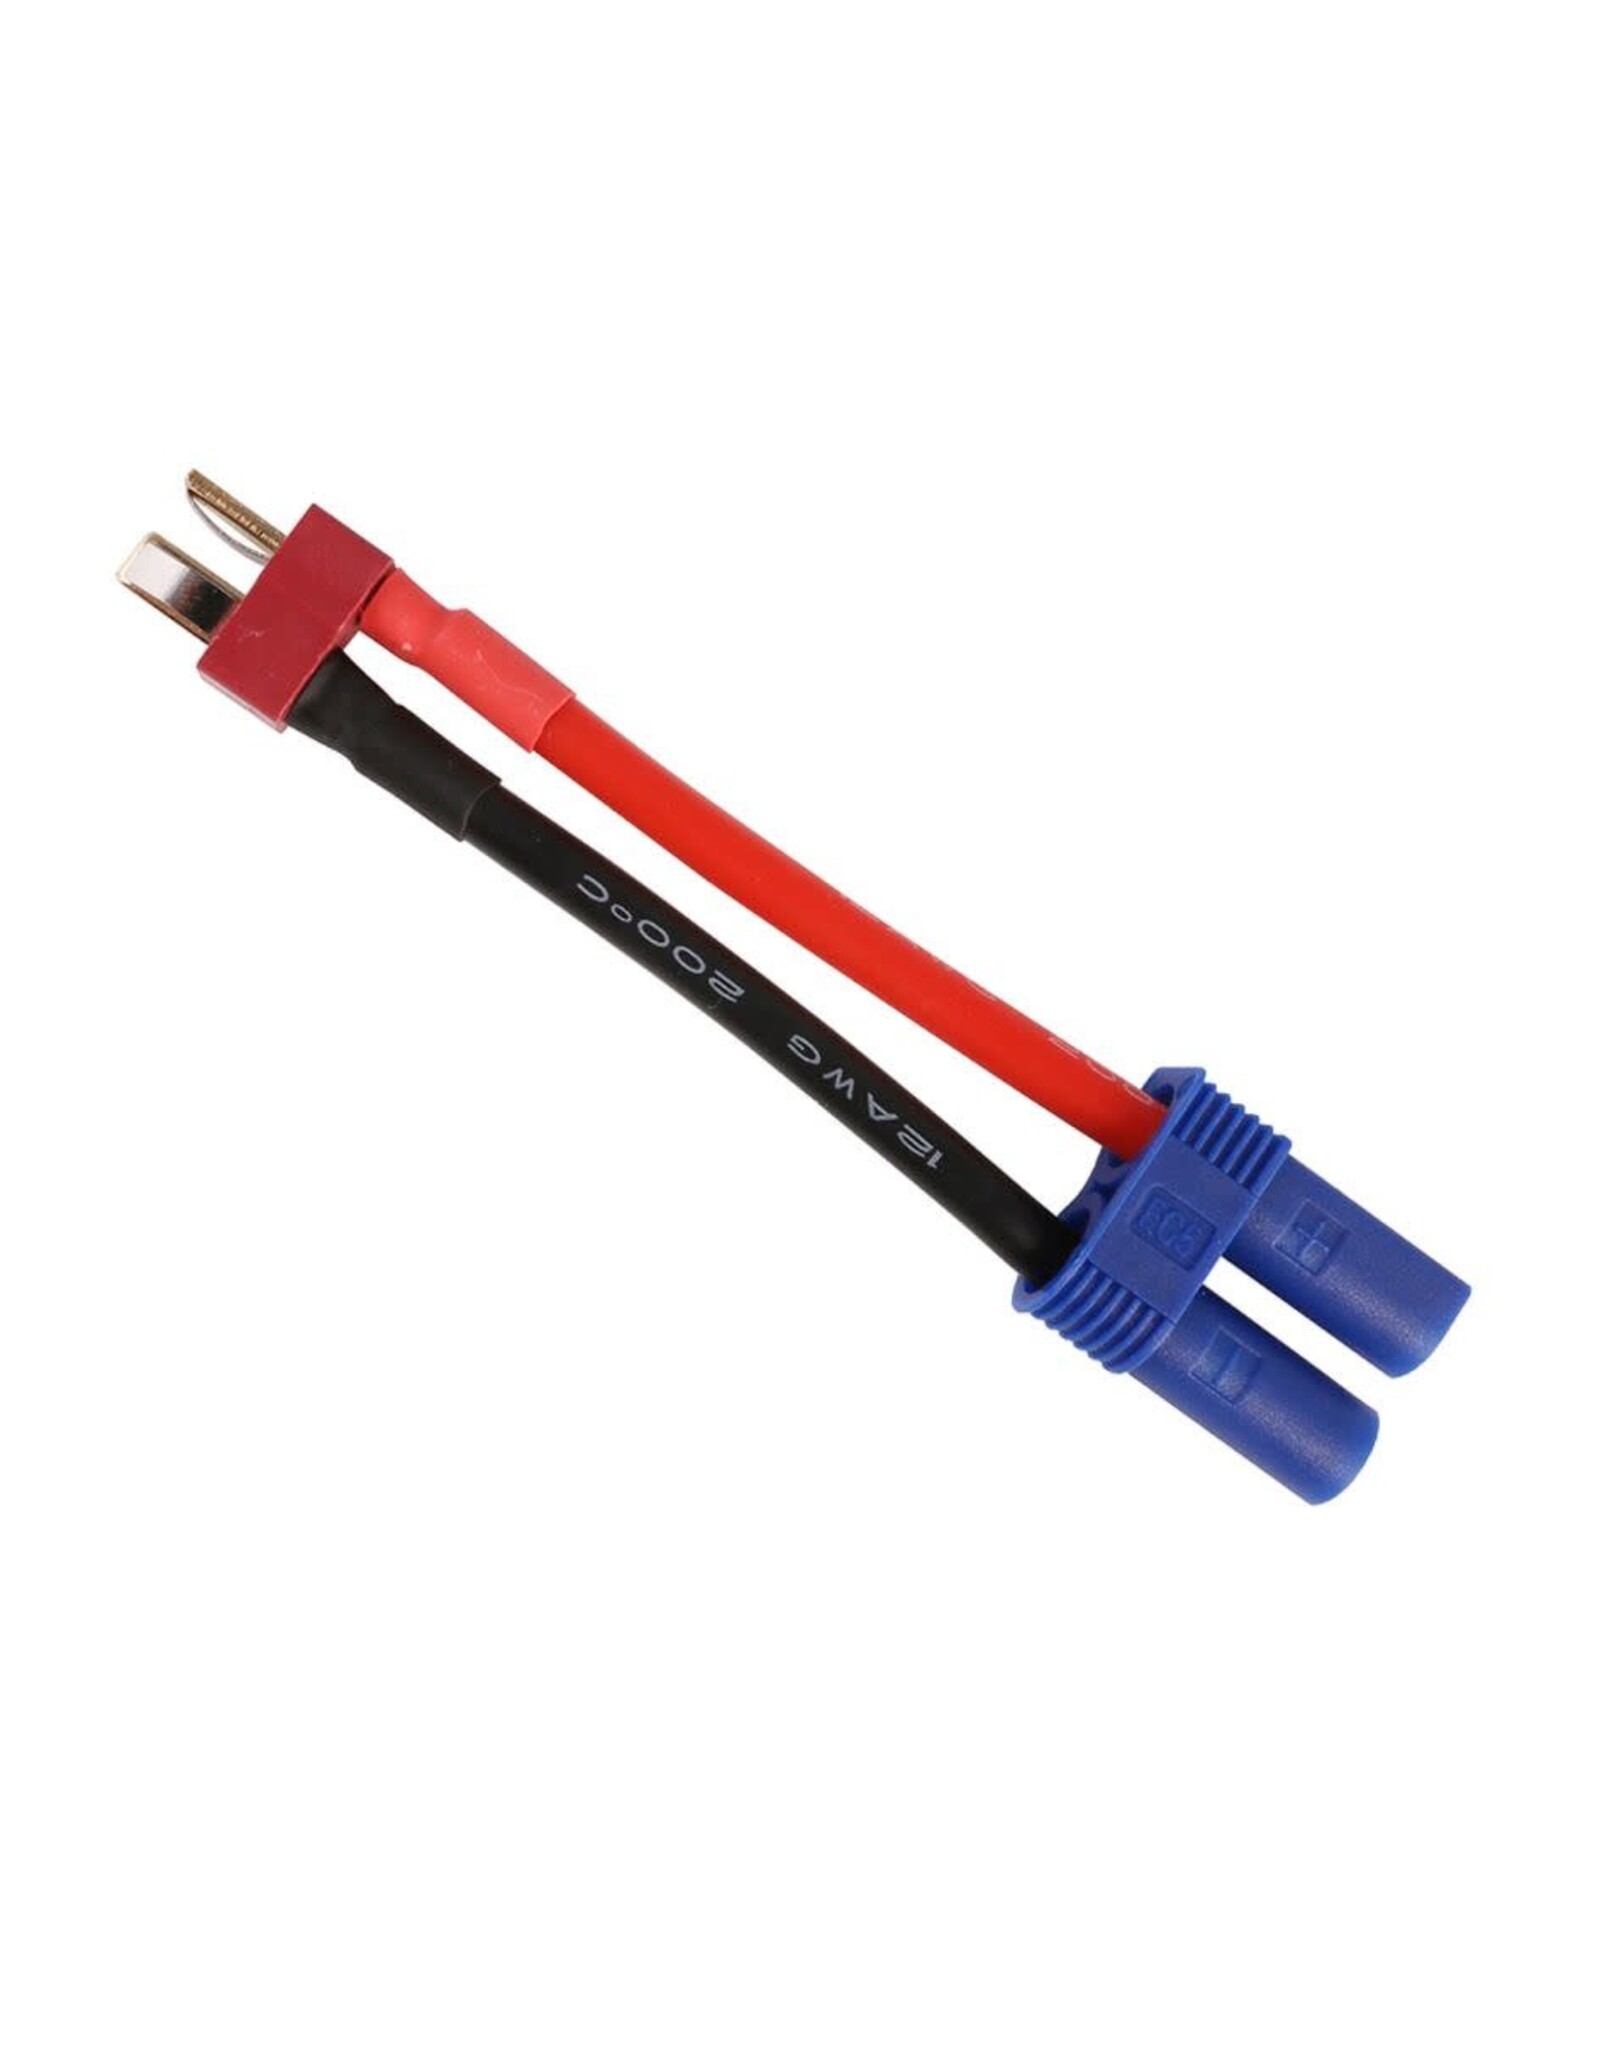 Gens Ace Deans Male To EC5 Female Adapter Cable